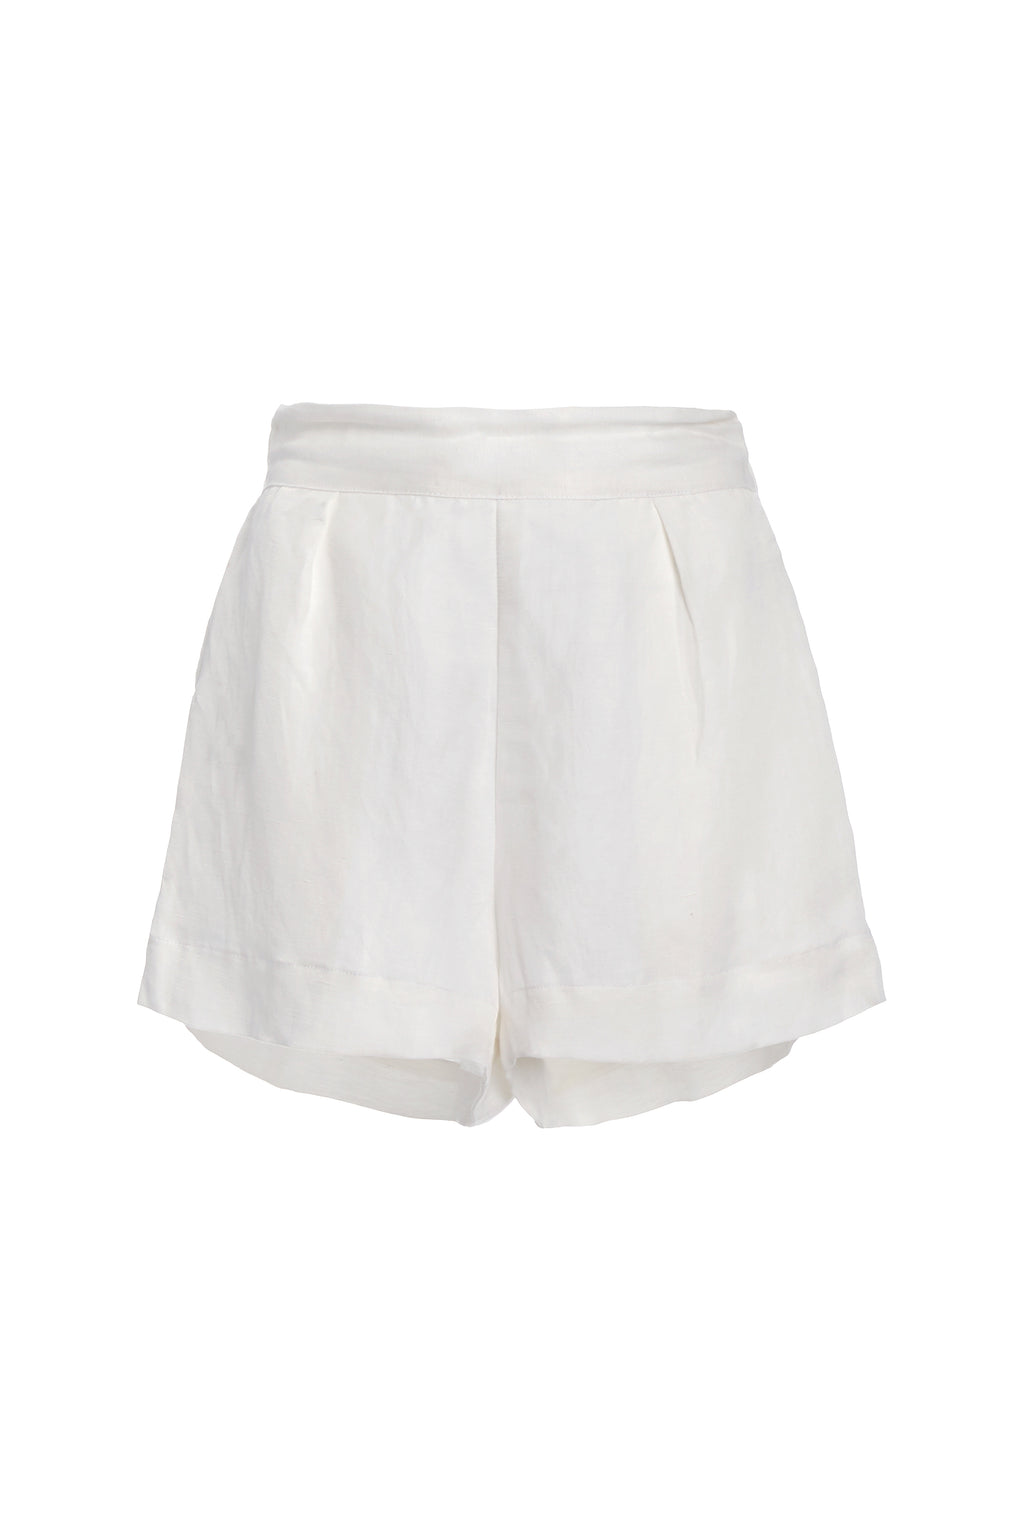 Quince Linen Shorts White - $13 (56% Off Retail) - From Avery